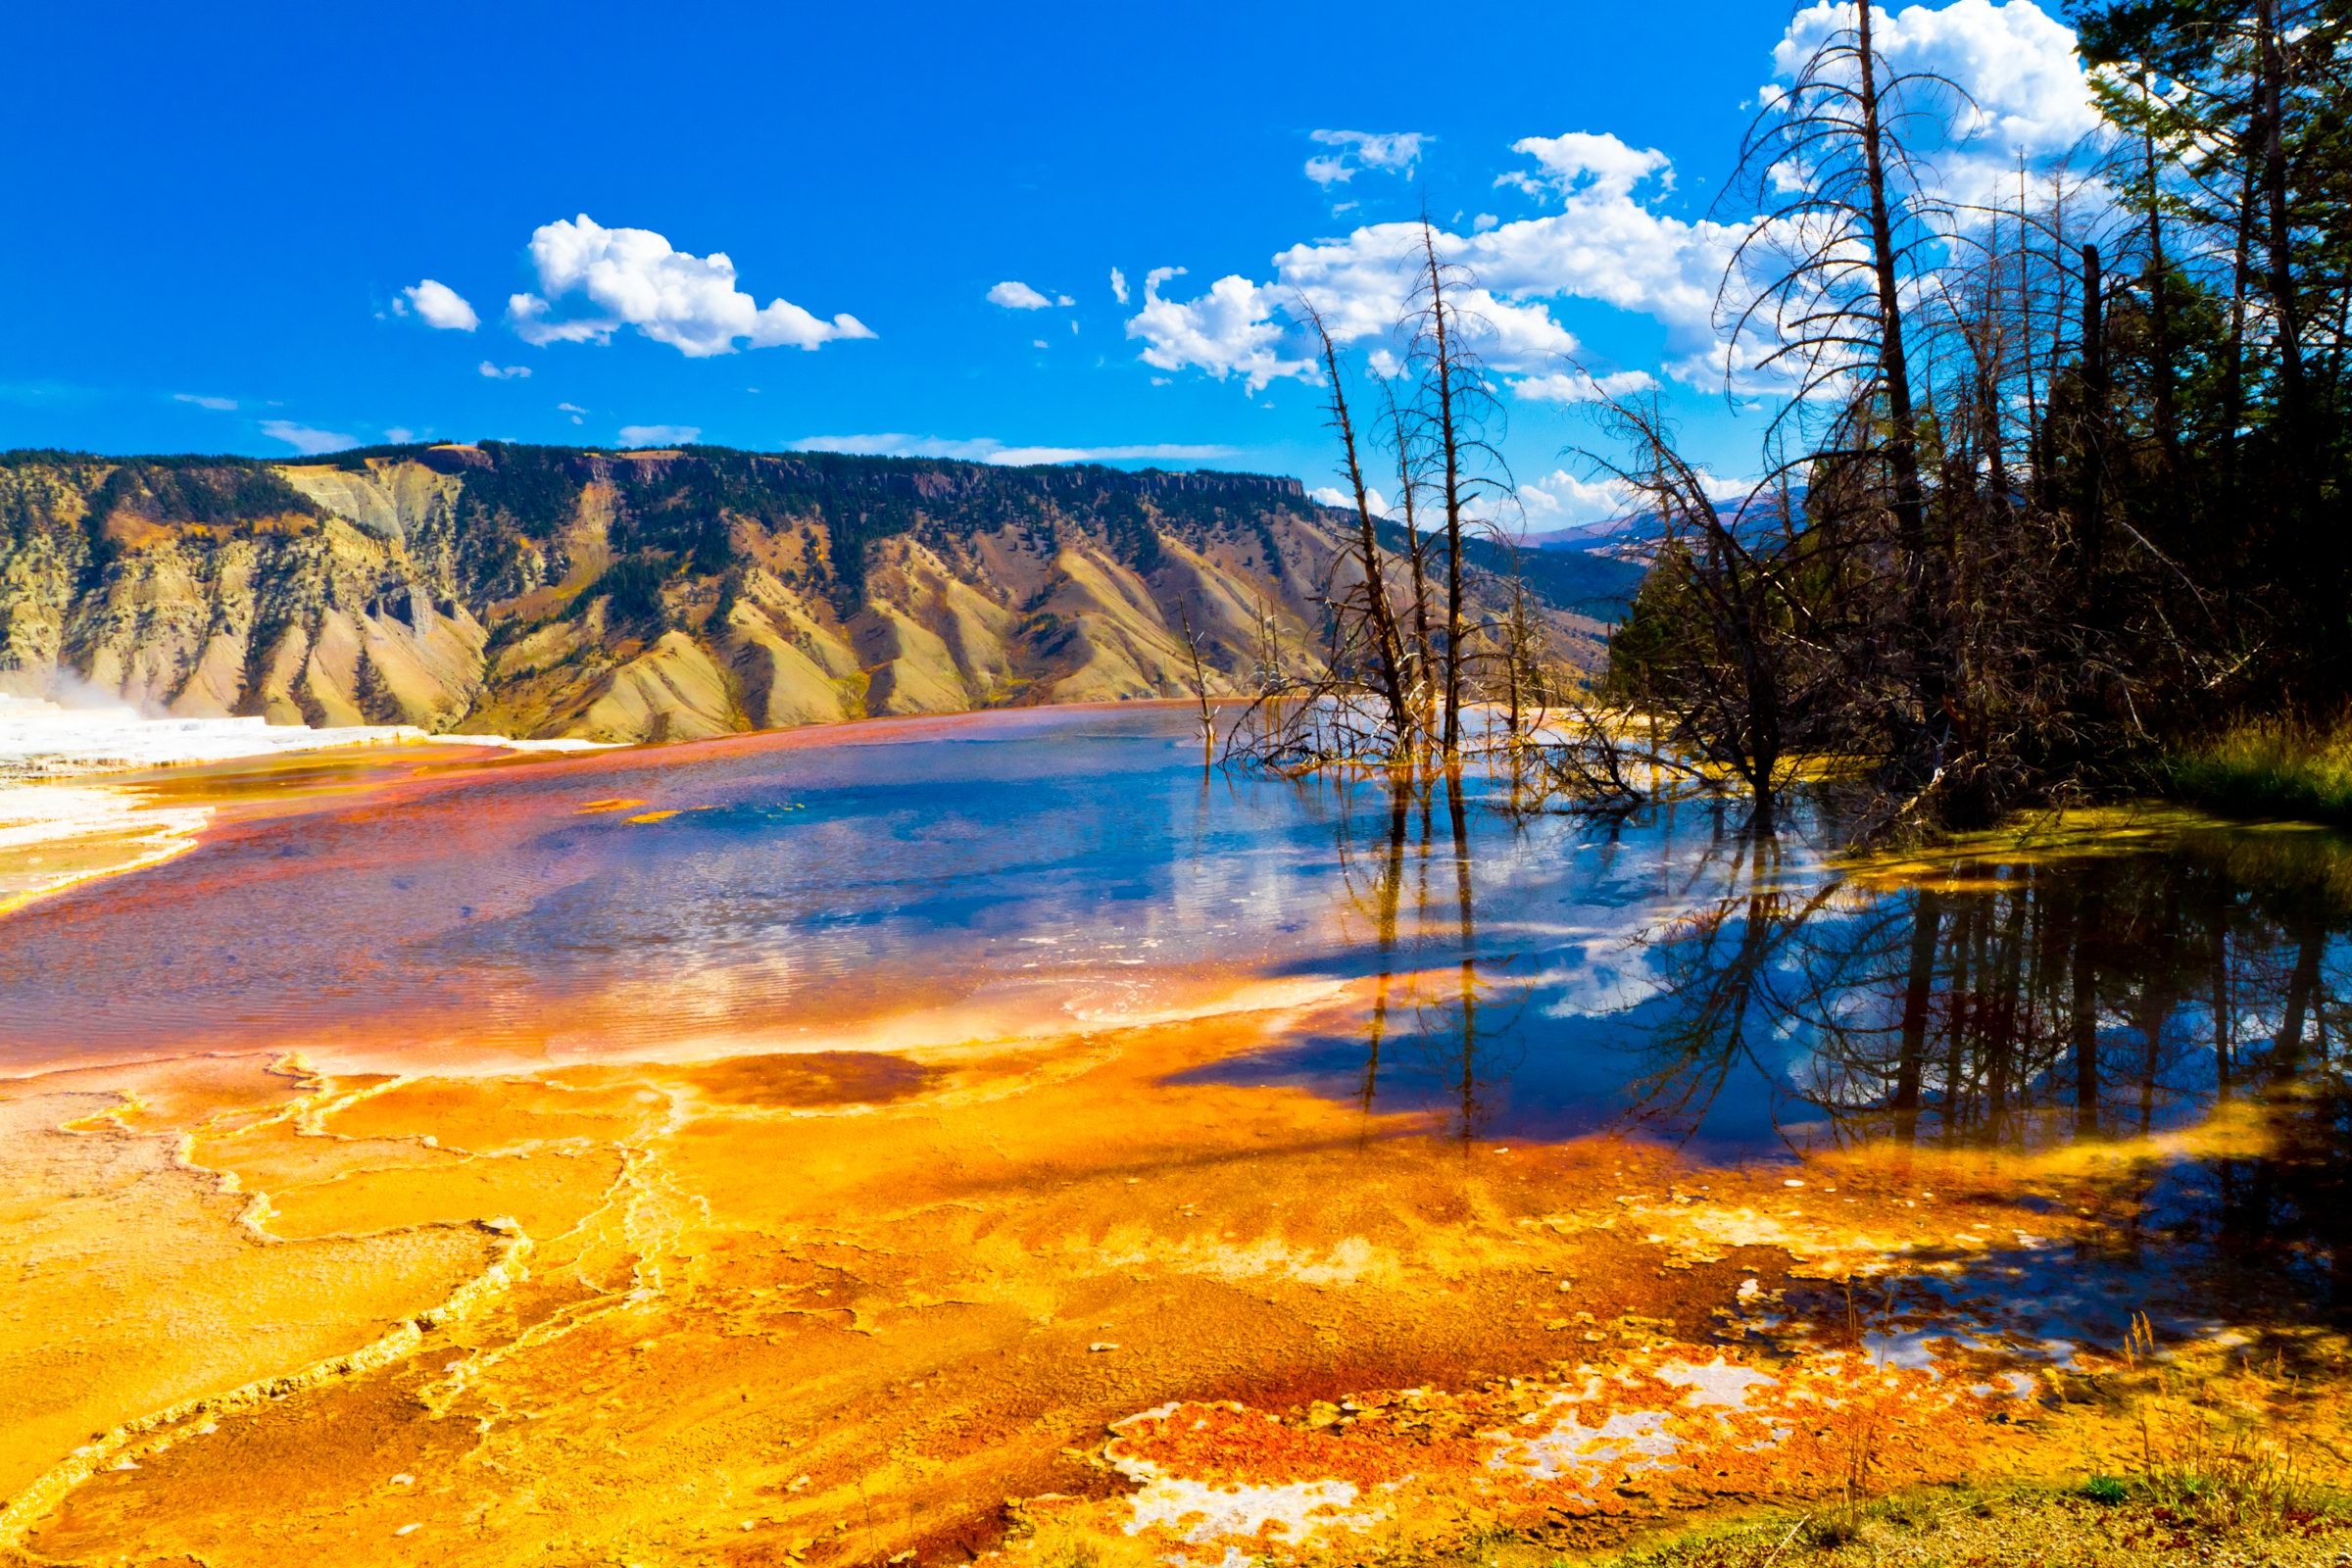 Yellowstone National Park, HD wallpapers, Nature's masterpiece, Visual delight, 2400x1600 HD Desktop